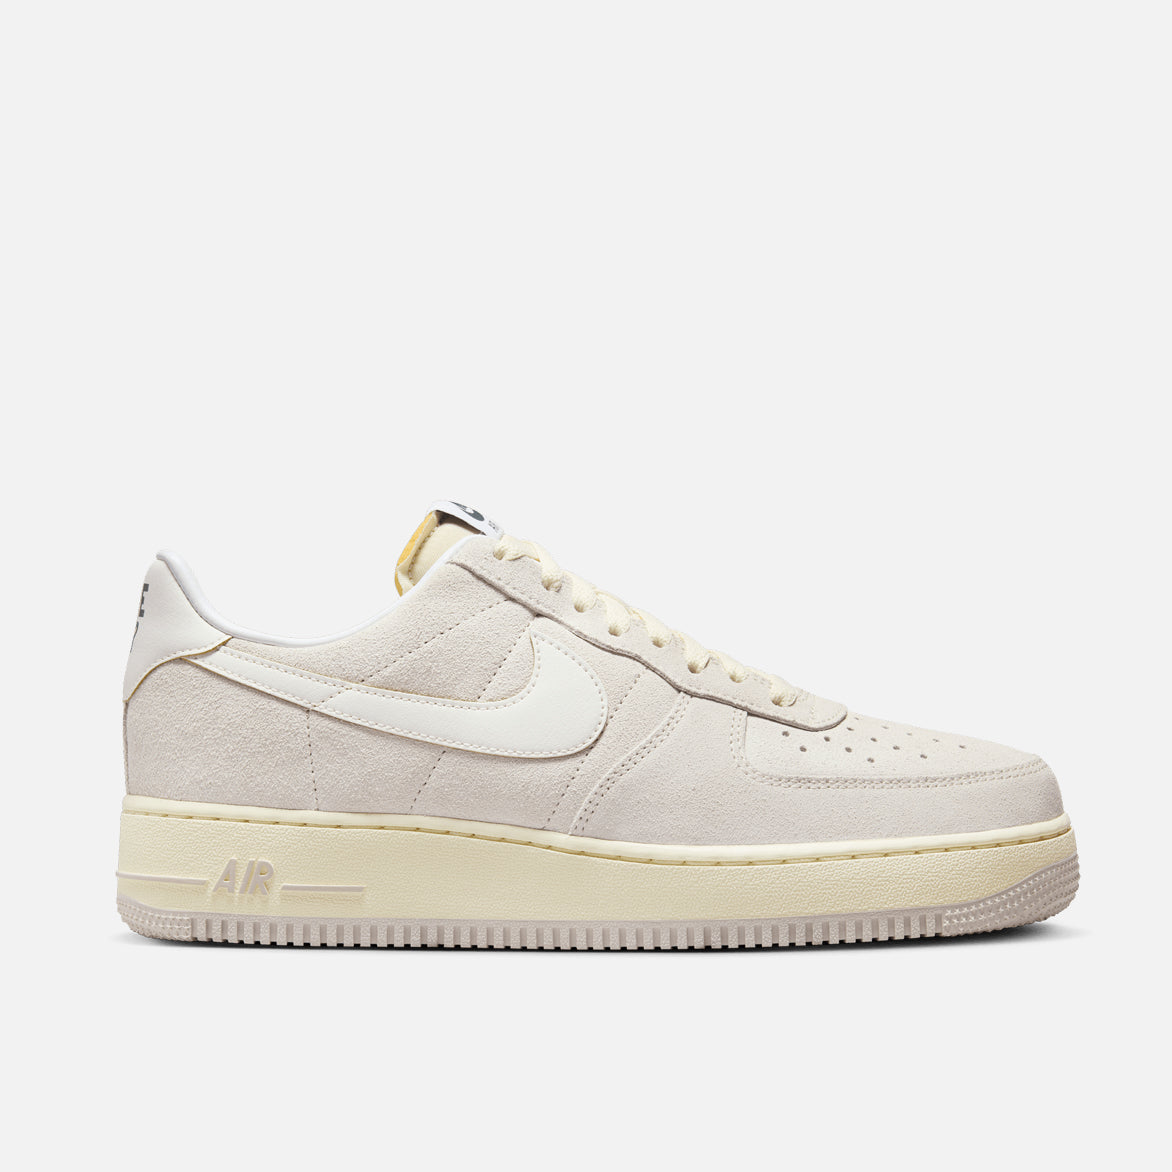 AIR FORCE 1 `07 "ATHLETIC DEPT."